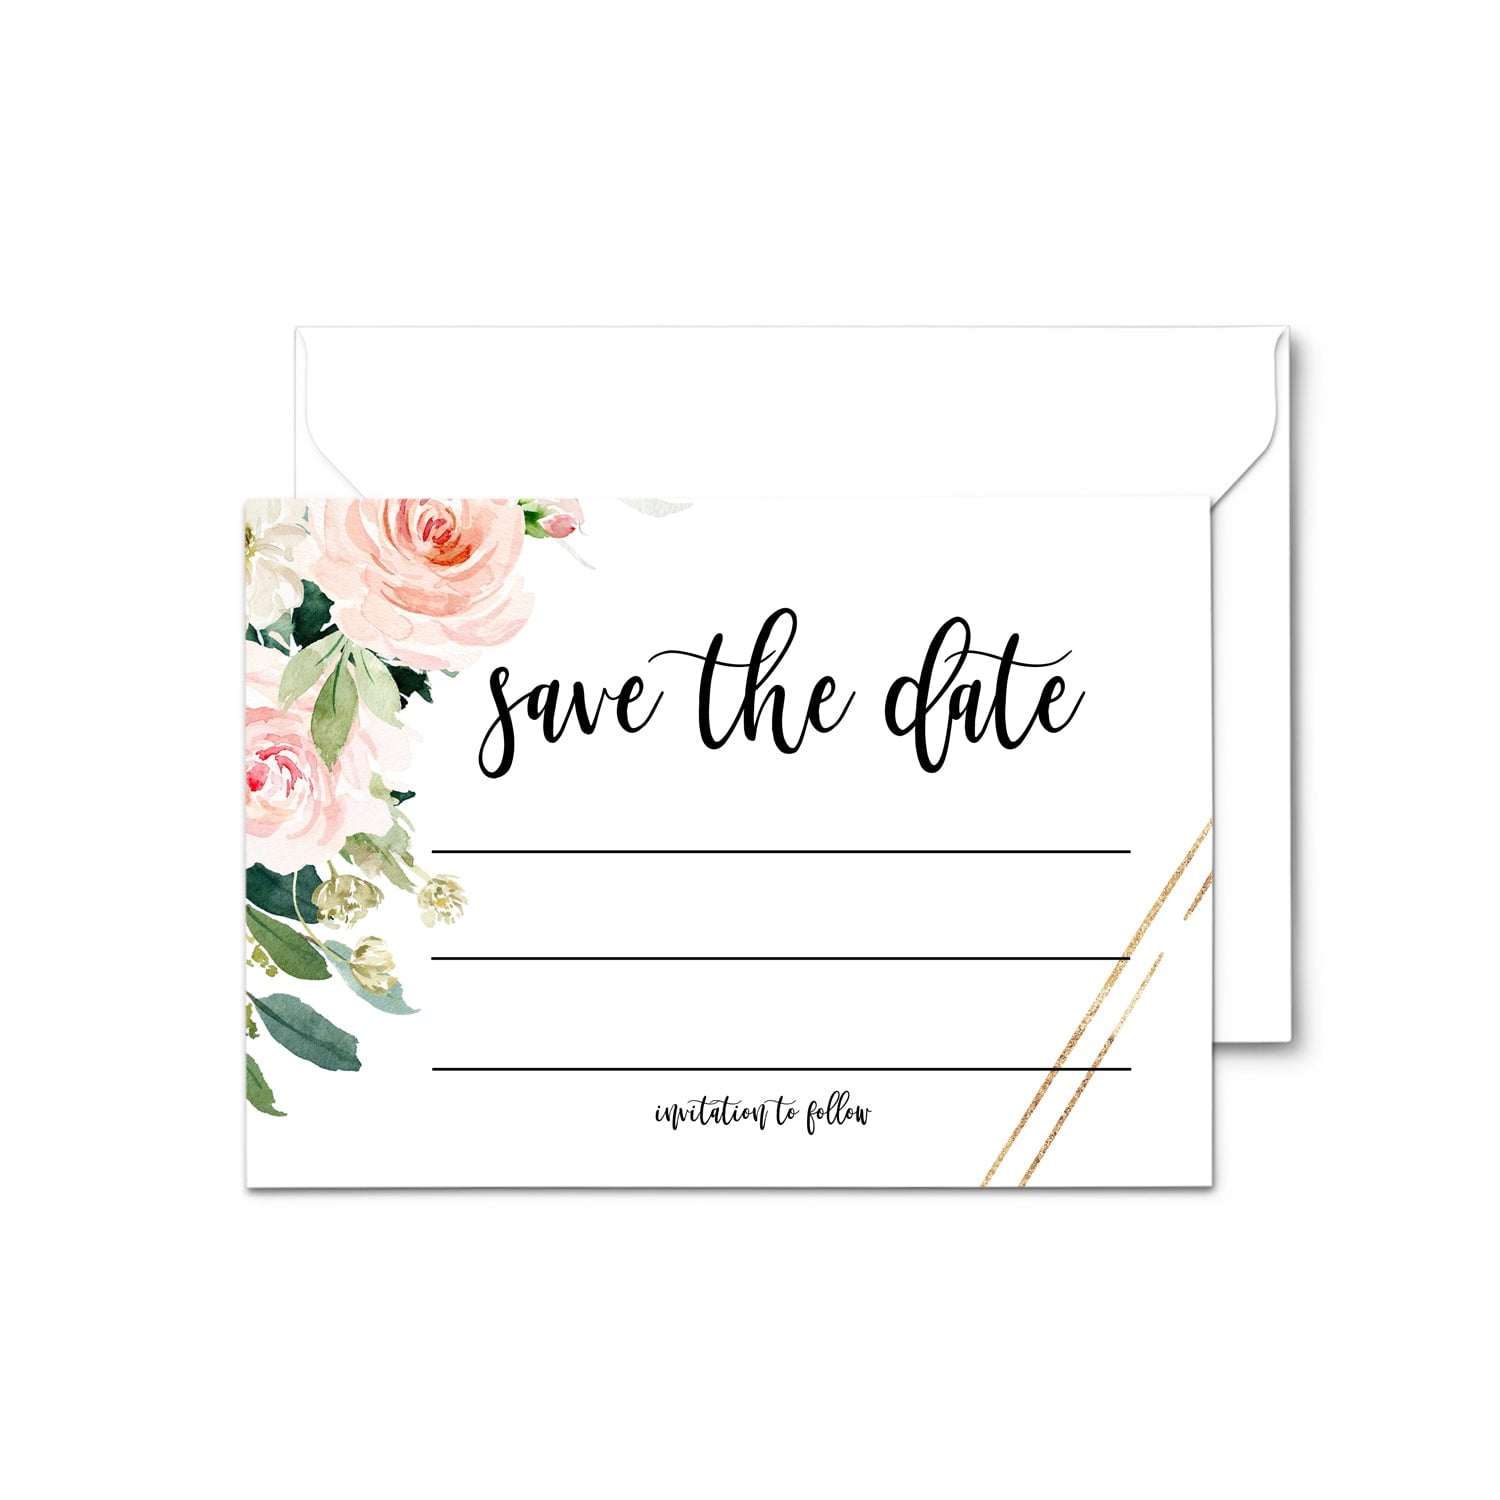 Save The Date Card Template. This Is An Instant Download throughout Save  The Date Cards Te…